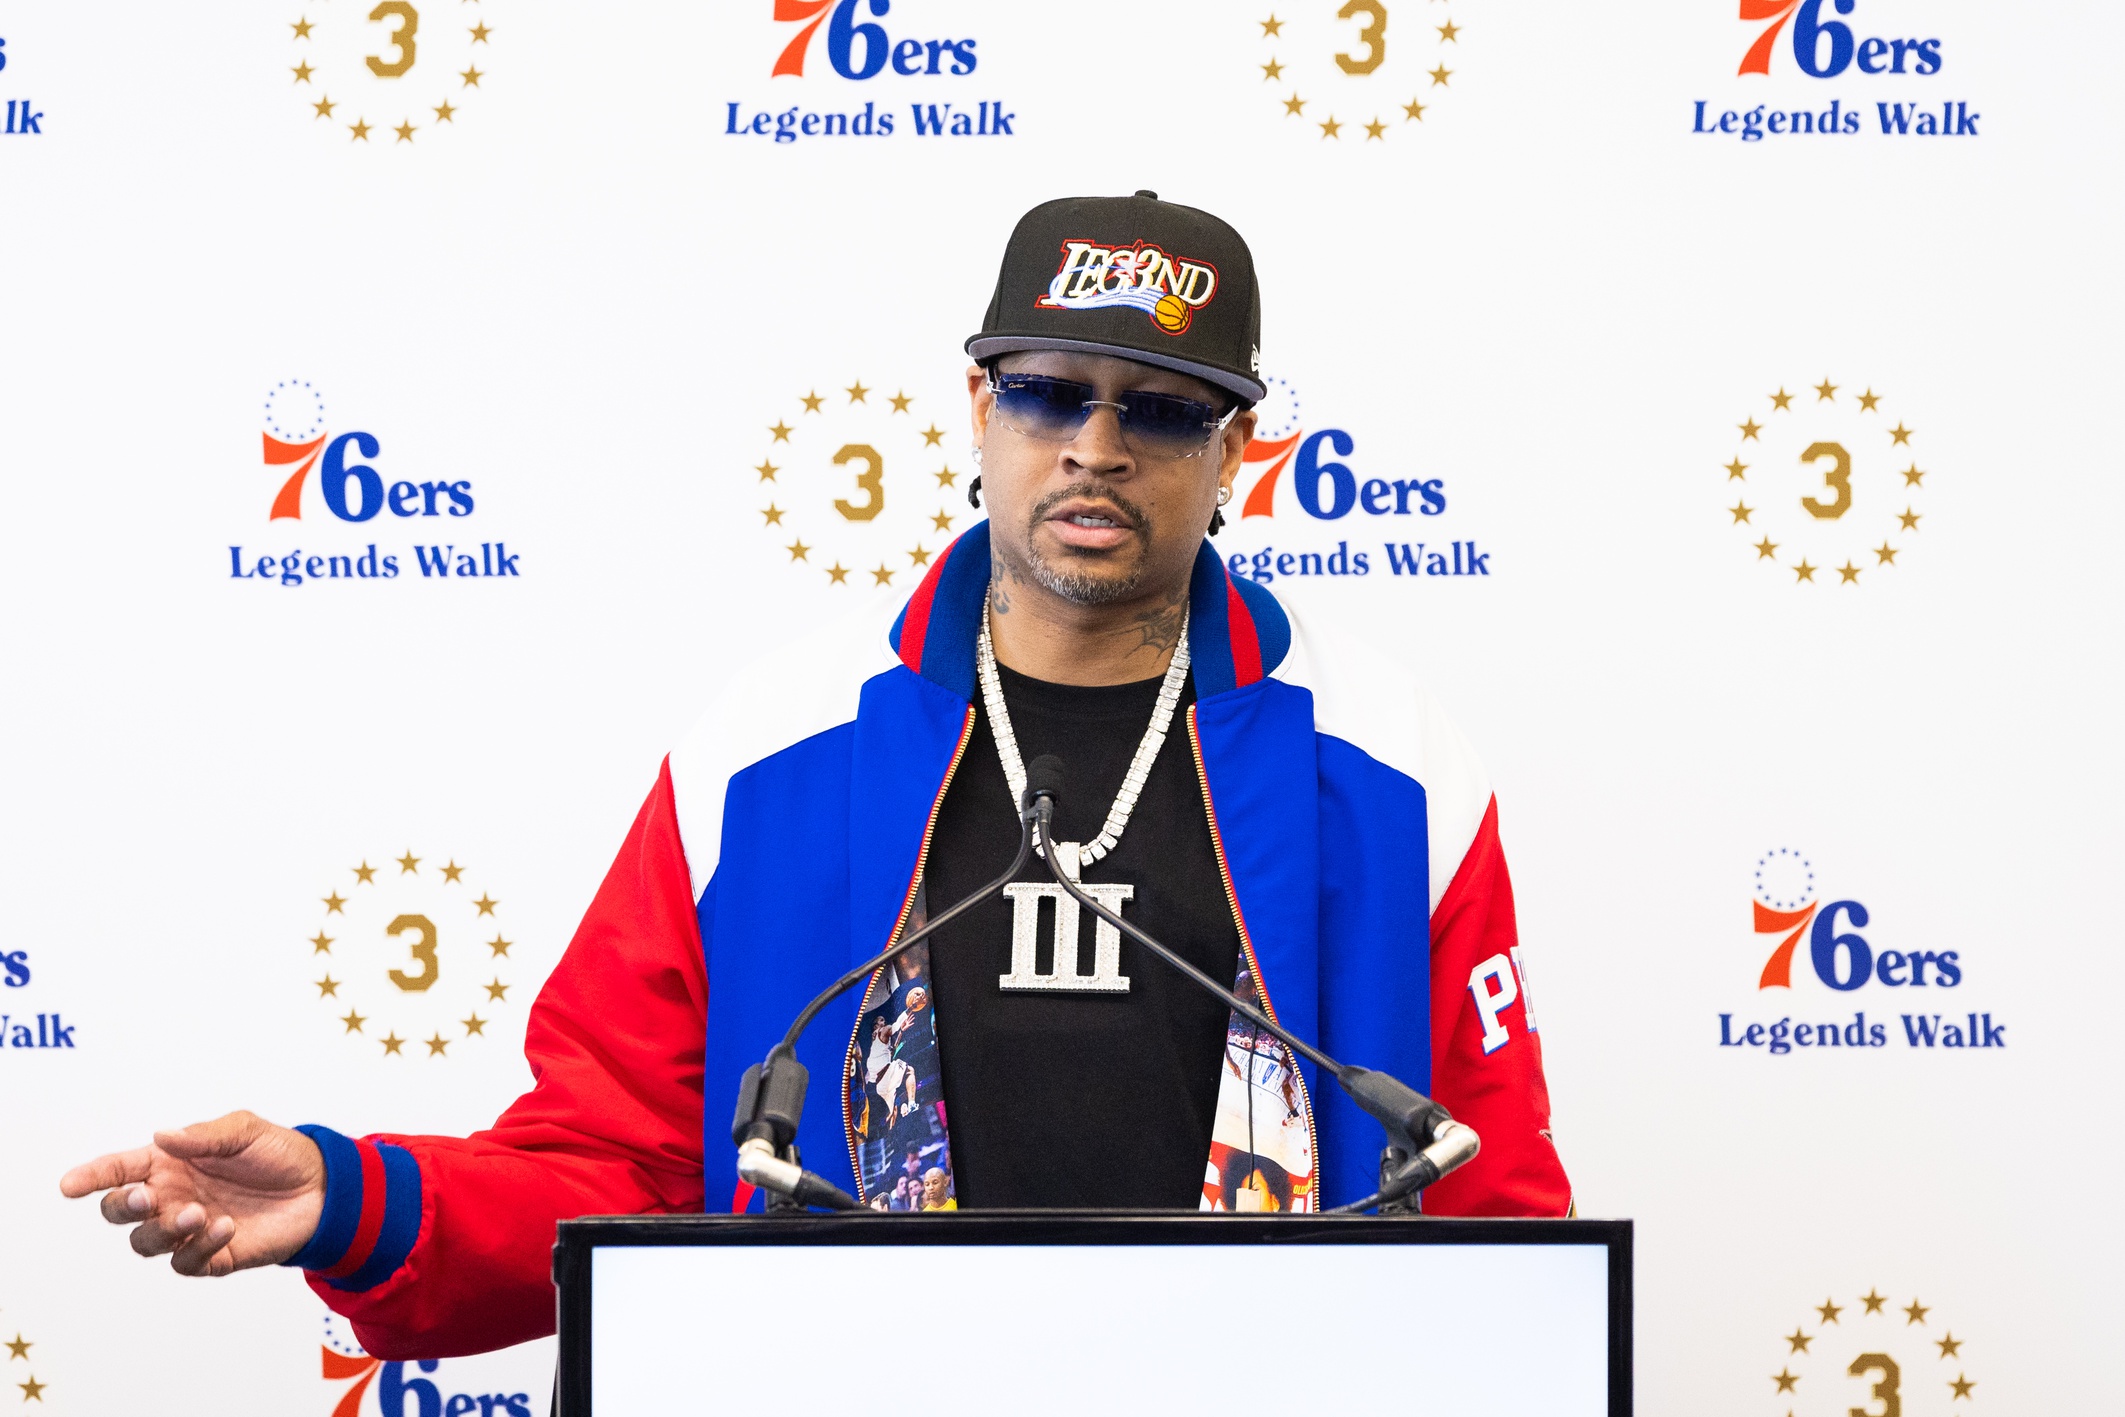 Allen Iverson is a 76ers legend who recently got a statue he is one of the most impactful players in league history.